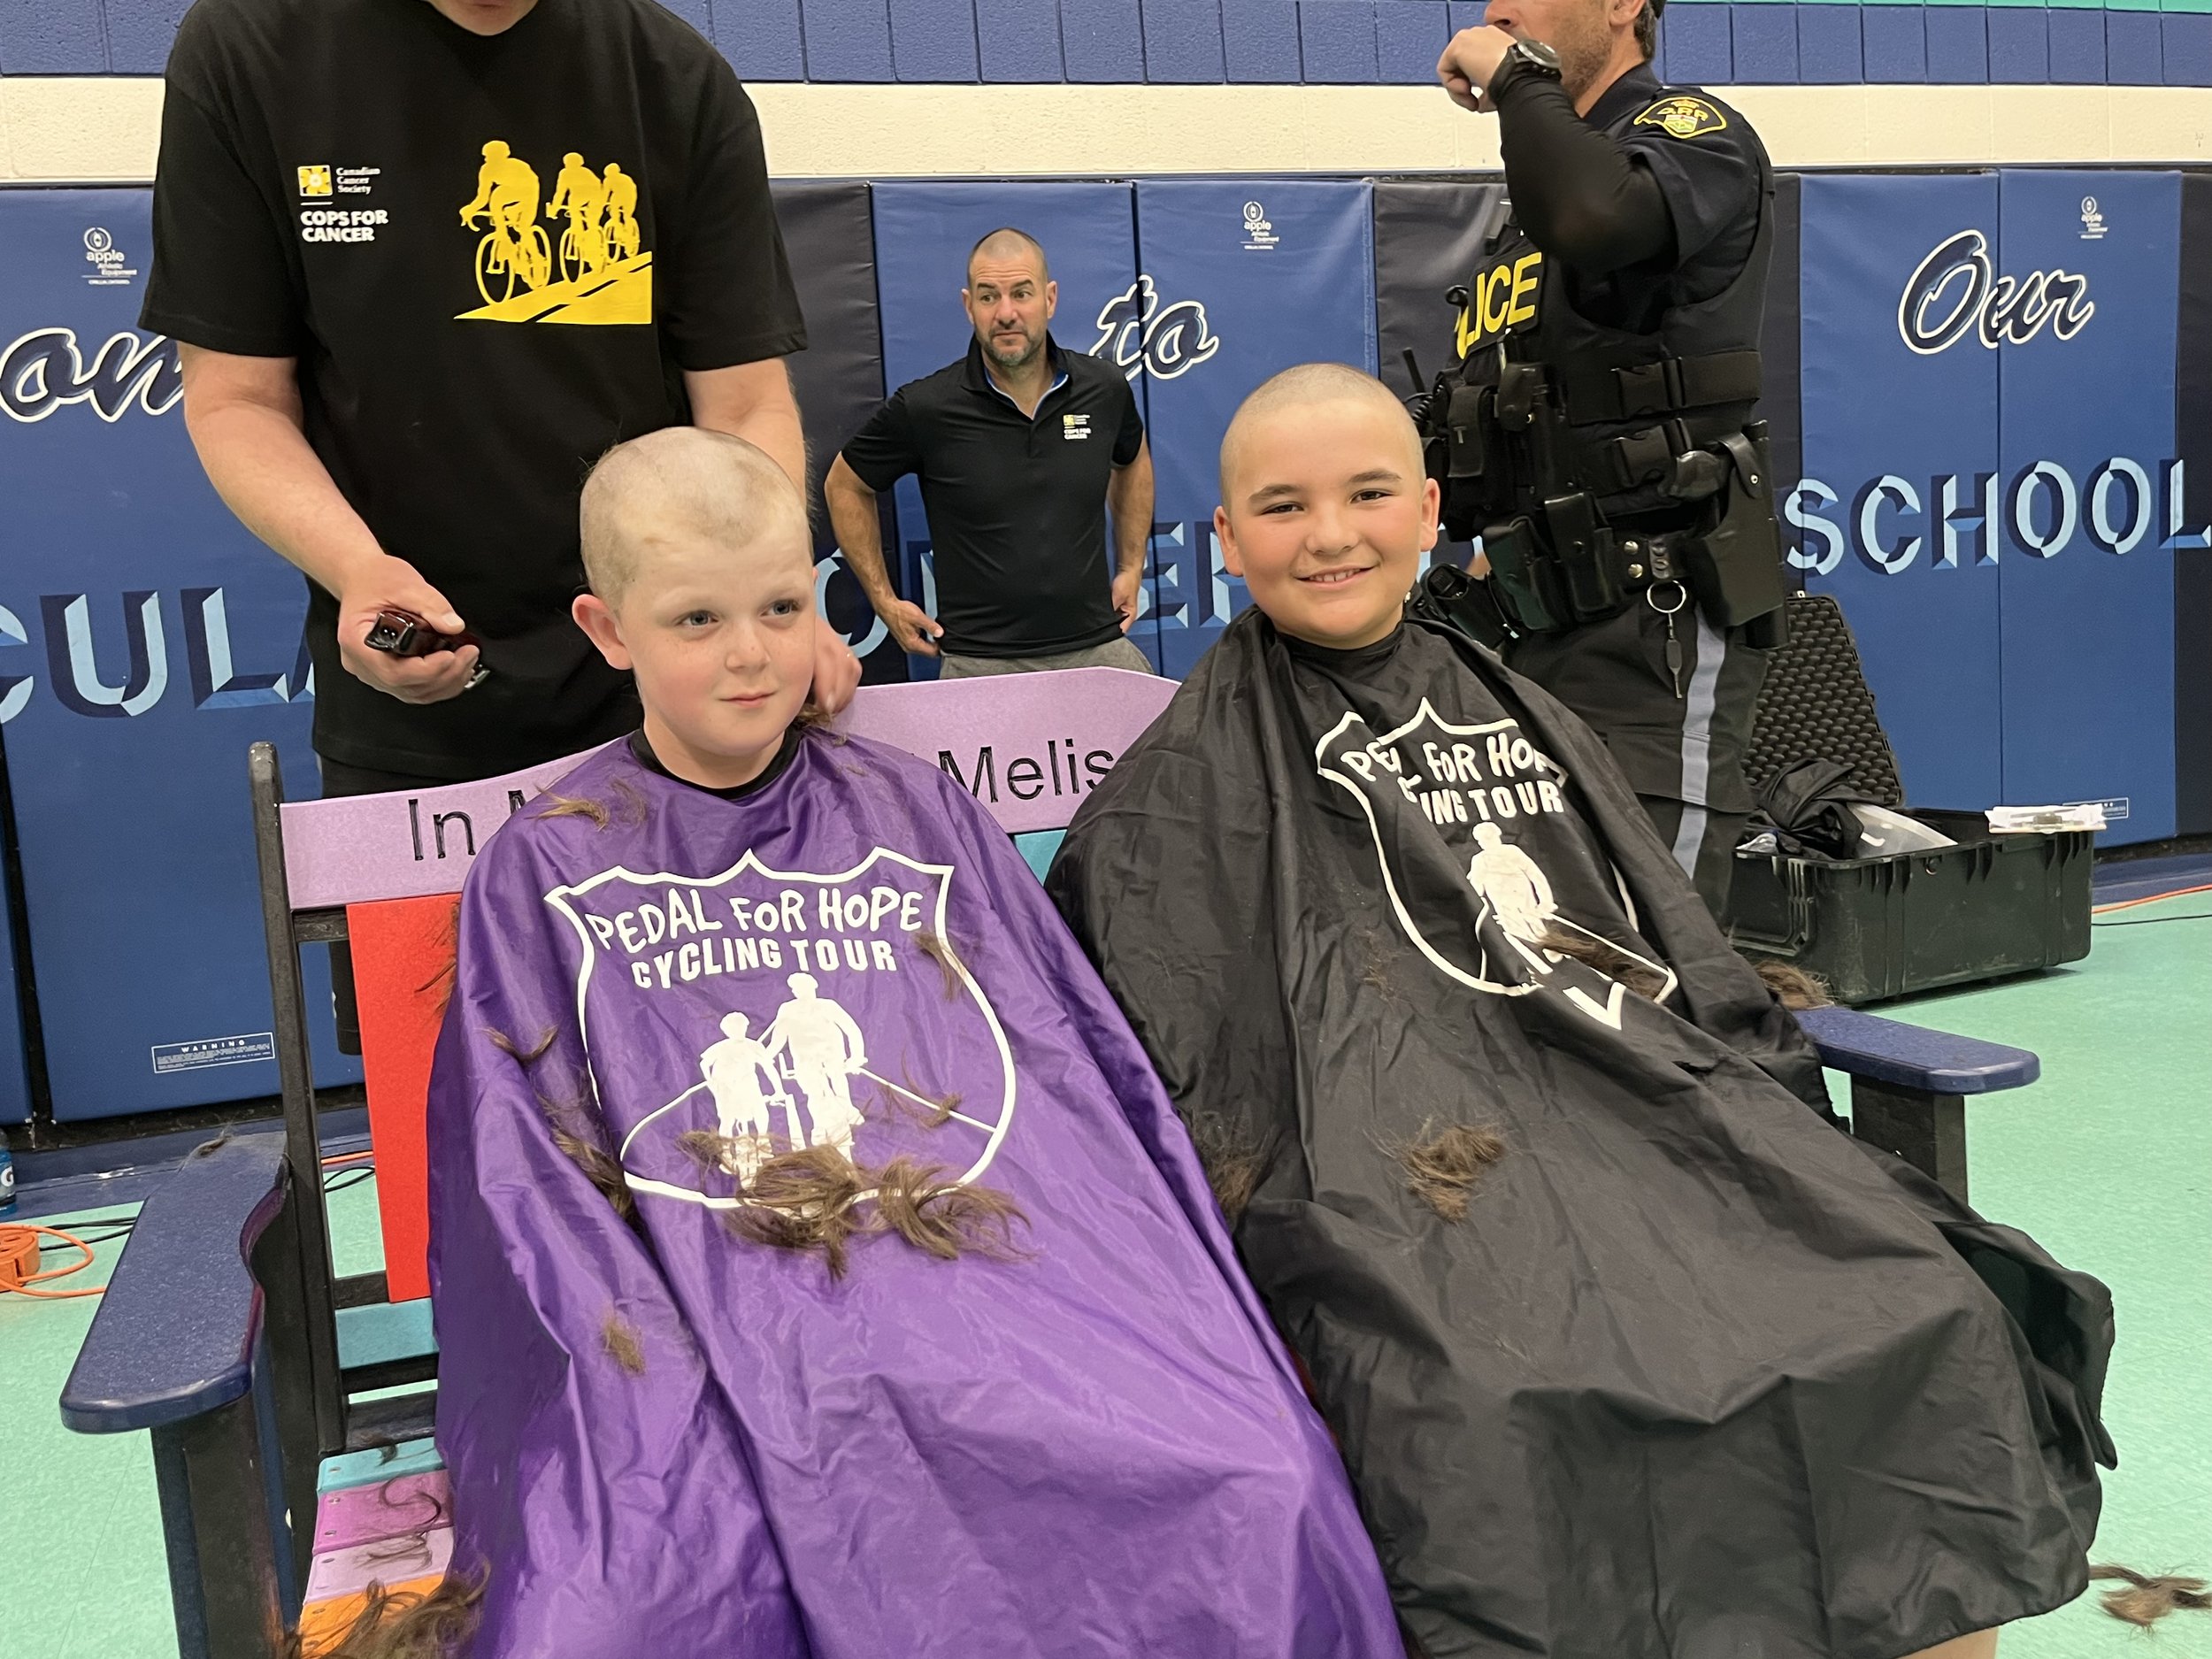  Students Finn and Giovanni getting their heads shaved. 